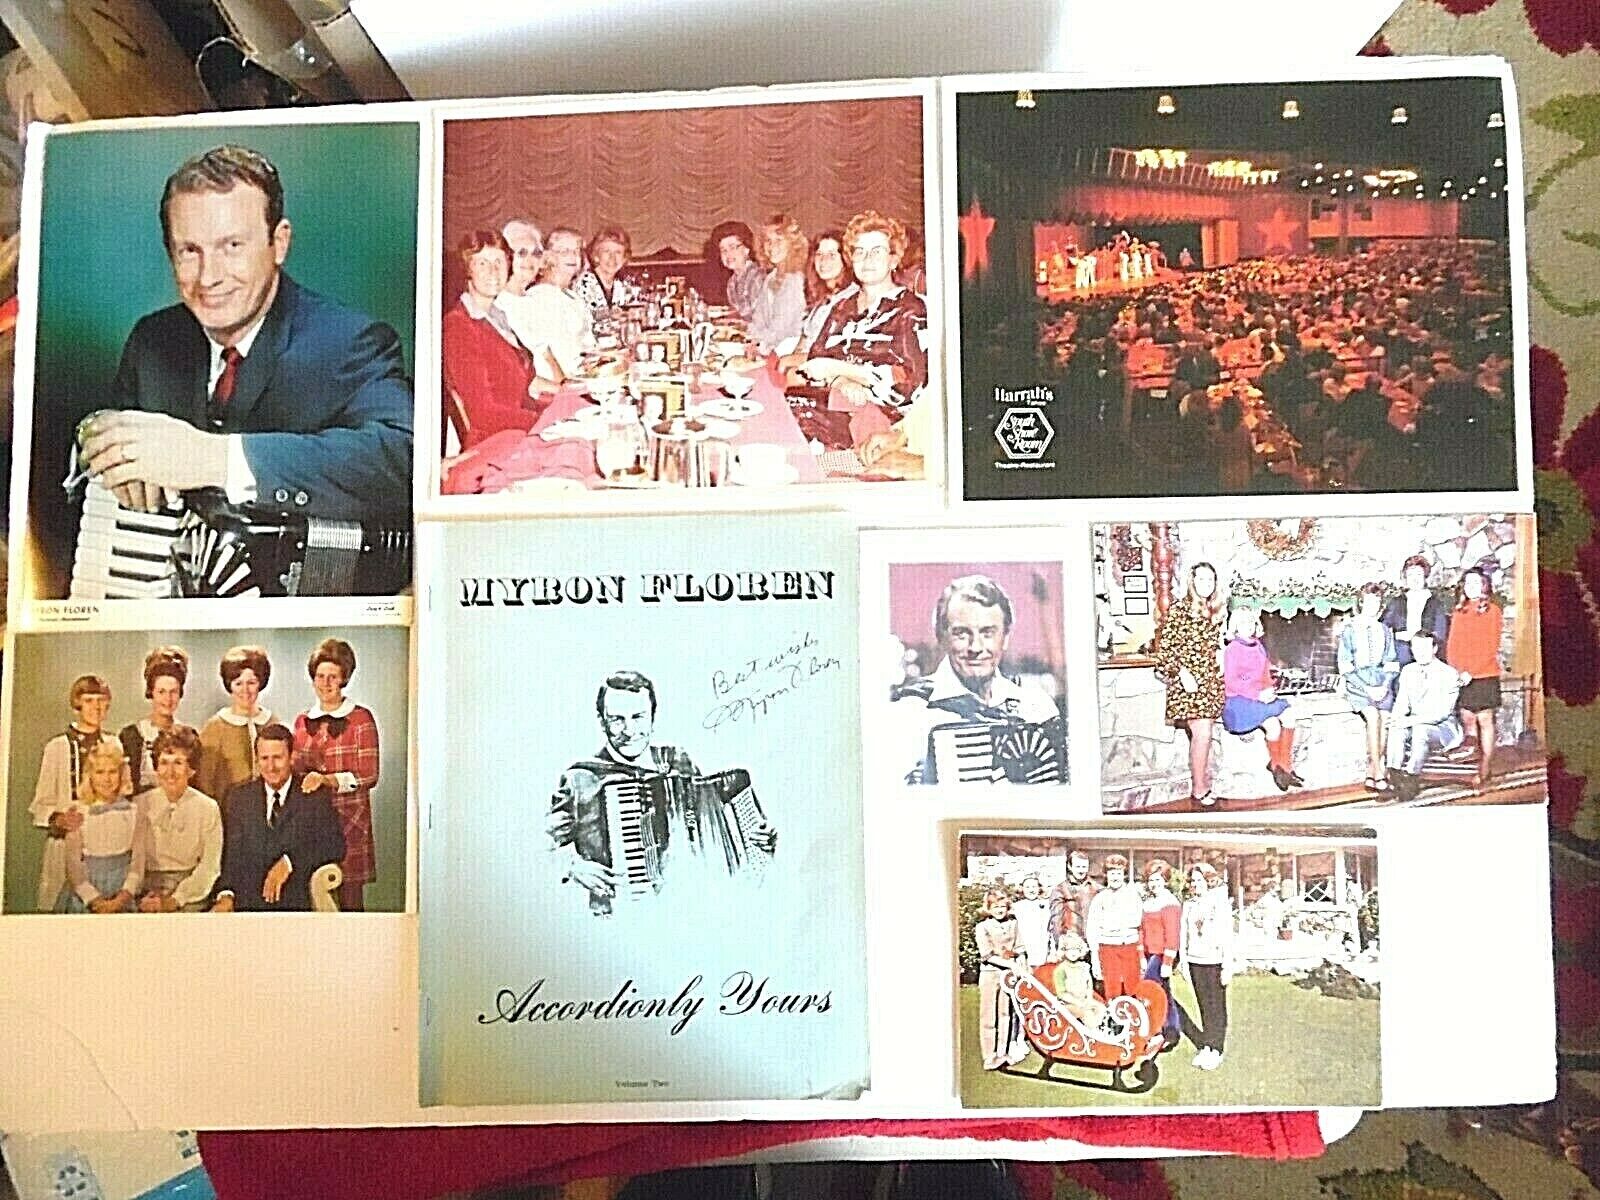 Lot Of 8 Myron Floren Items (The Lawrence Welk Show) Picts, Cards, Most Signed